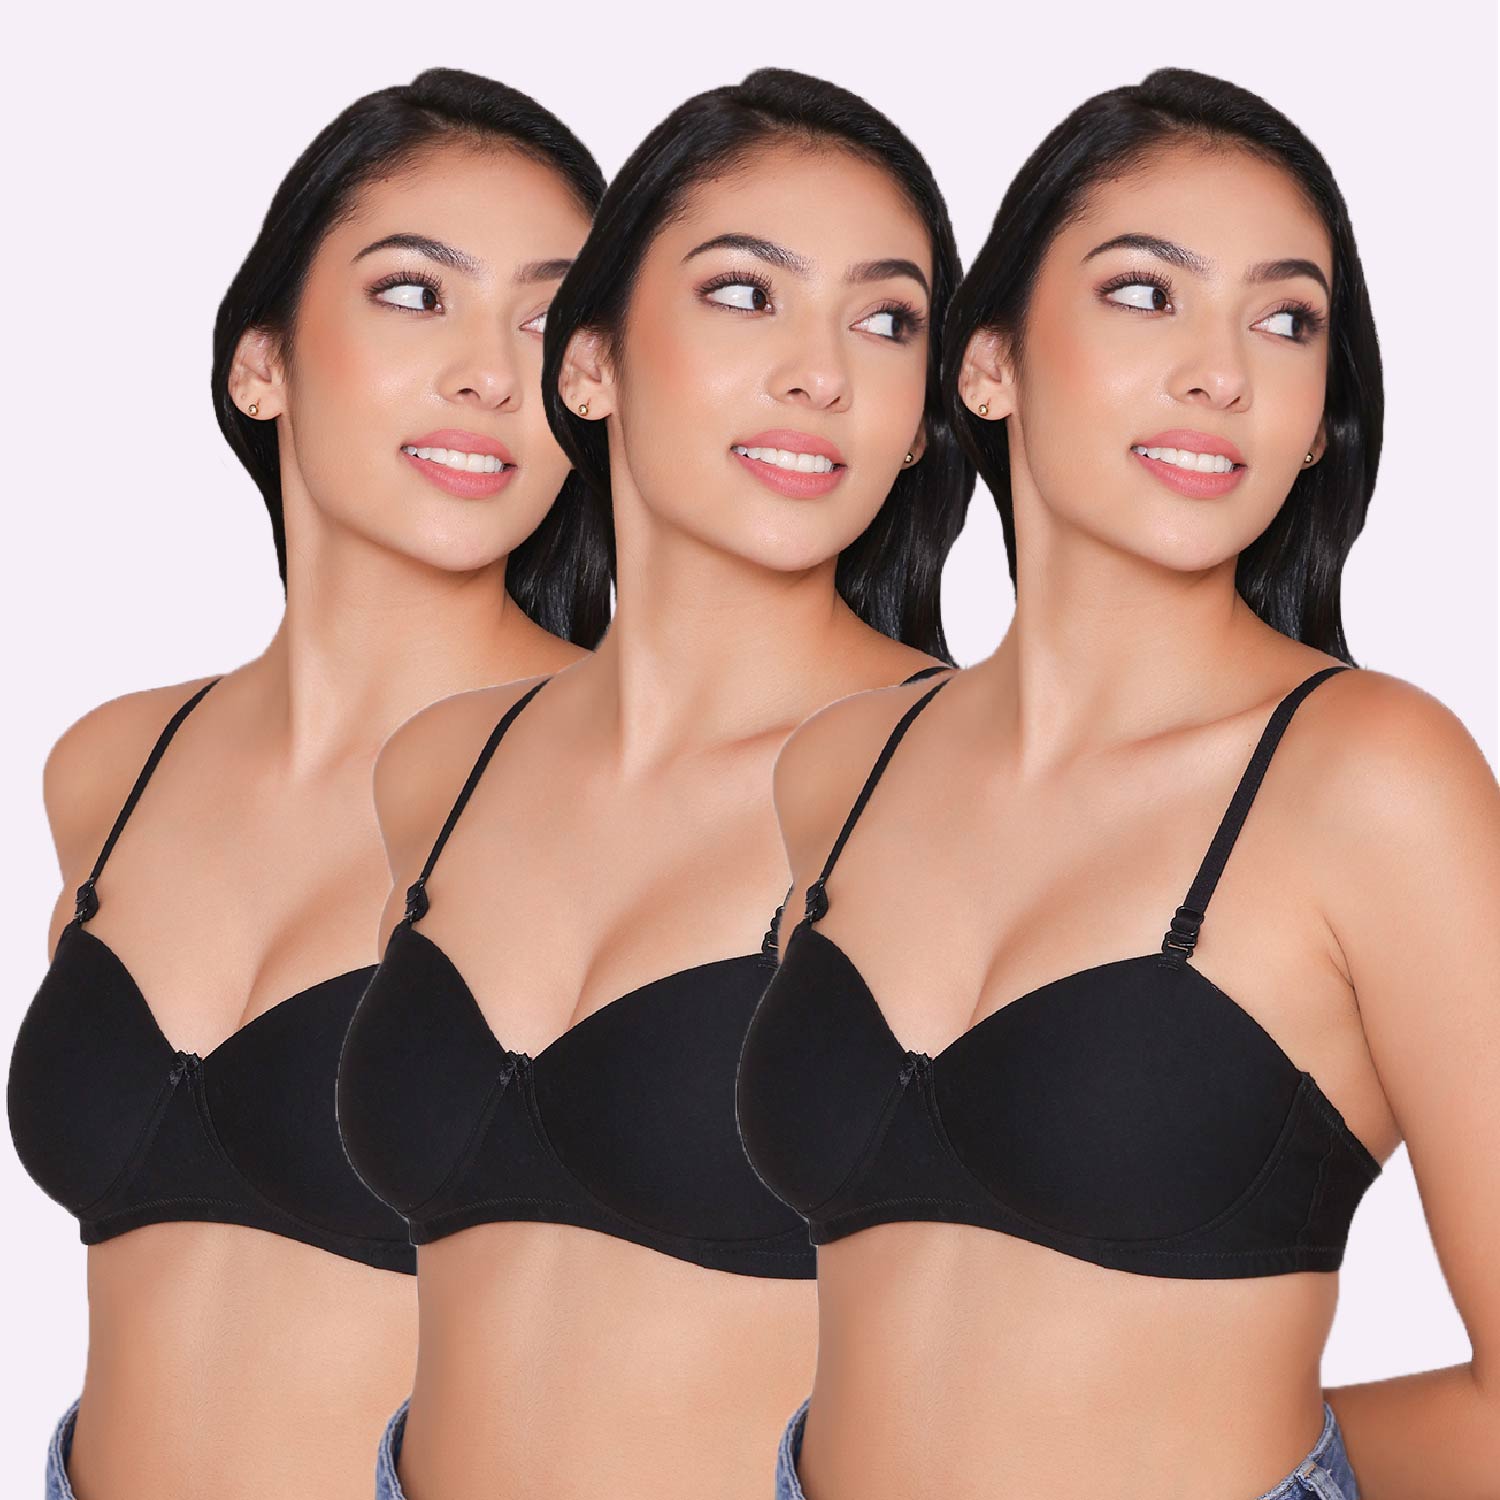 Find your perfect T-shirt bras here